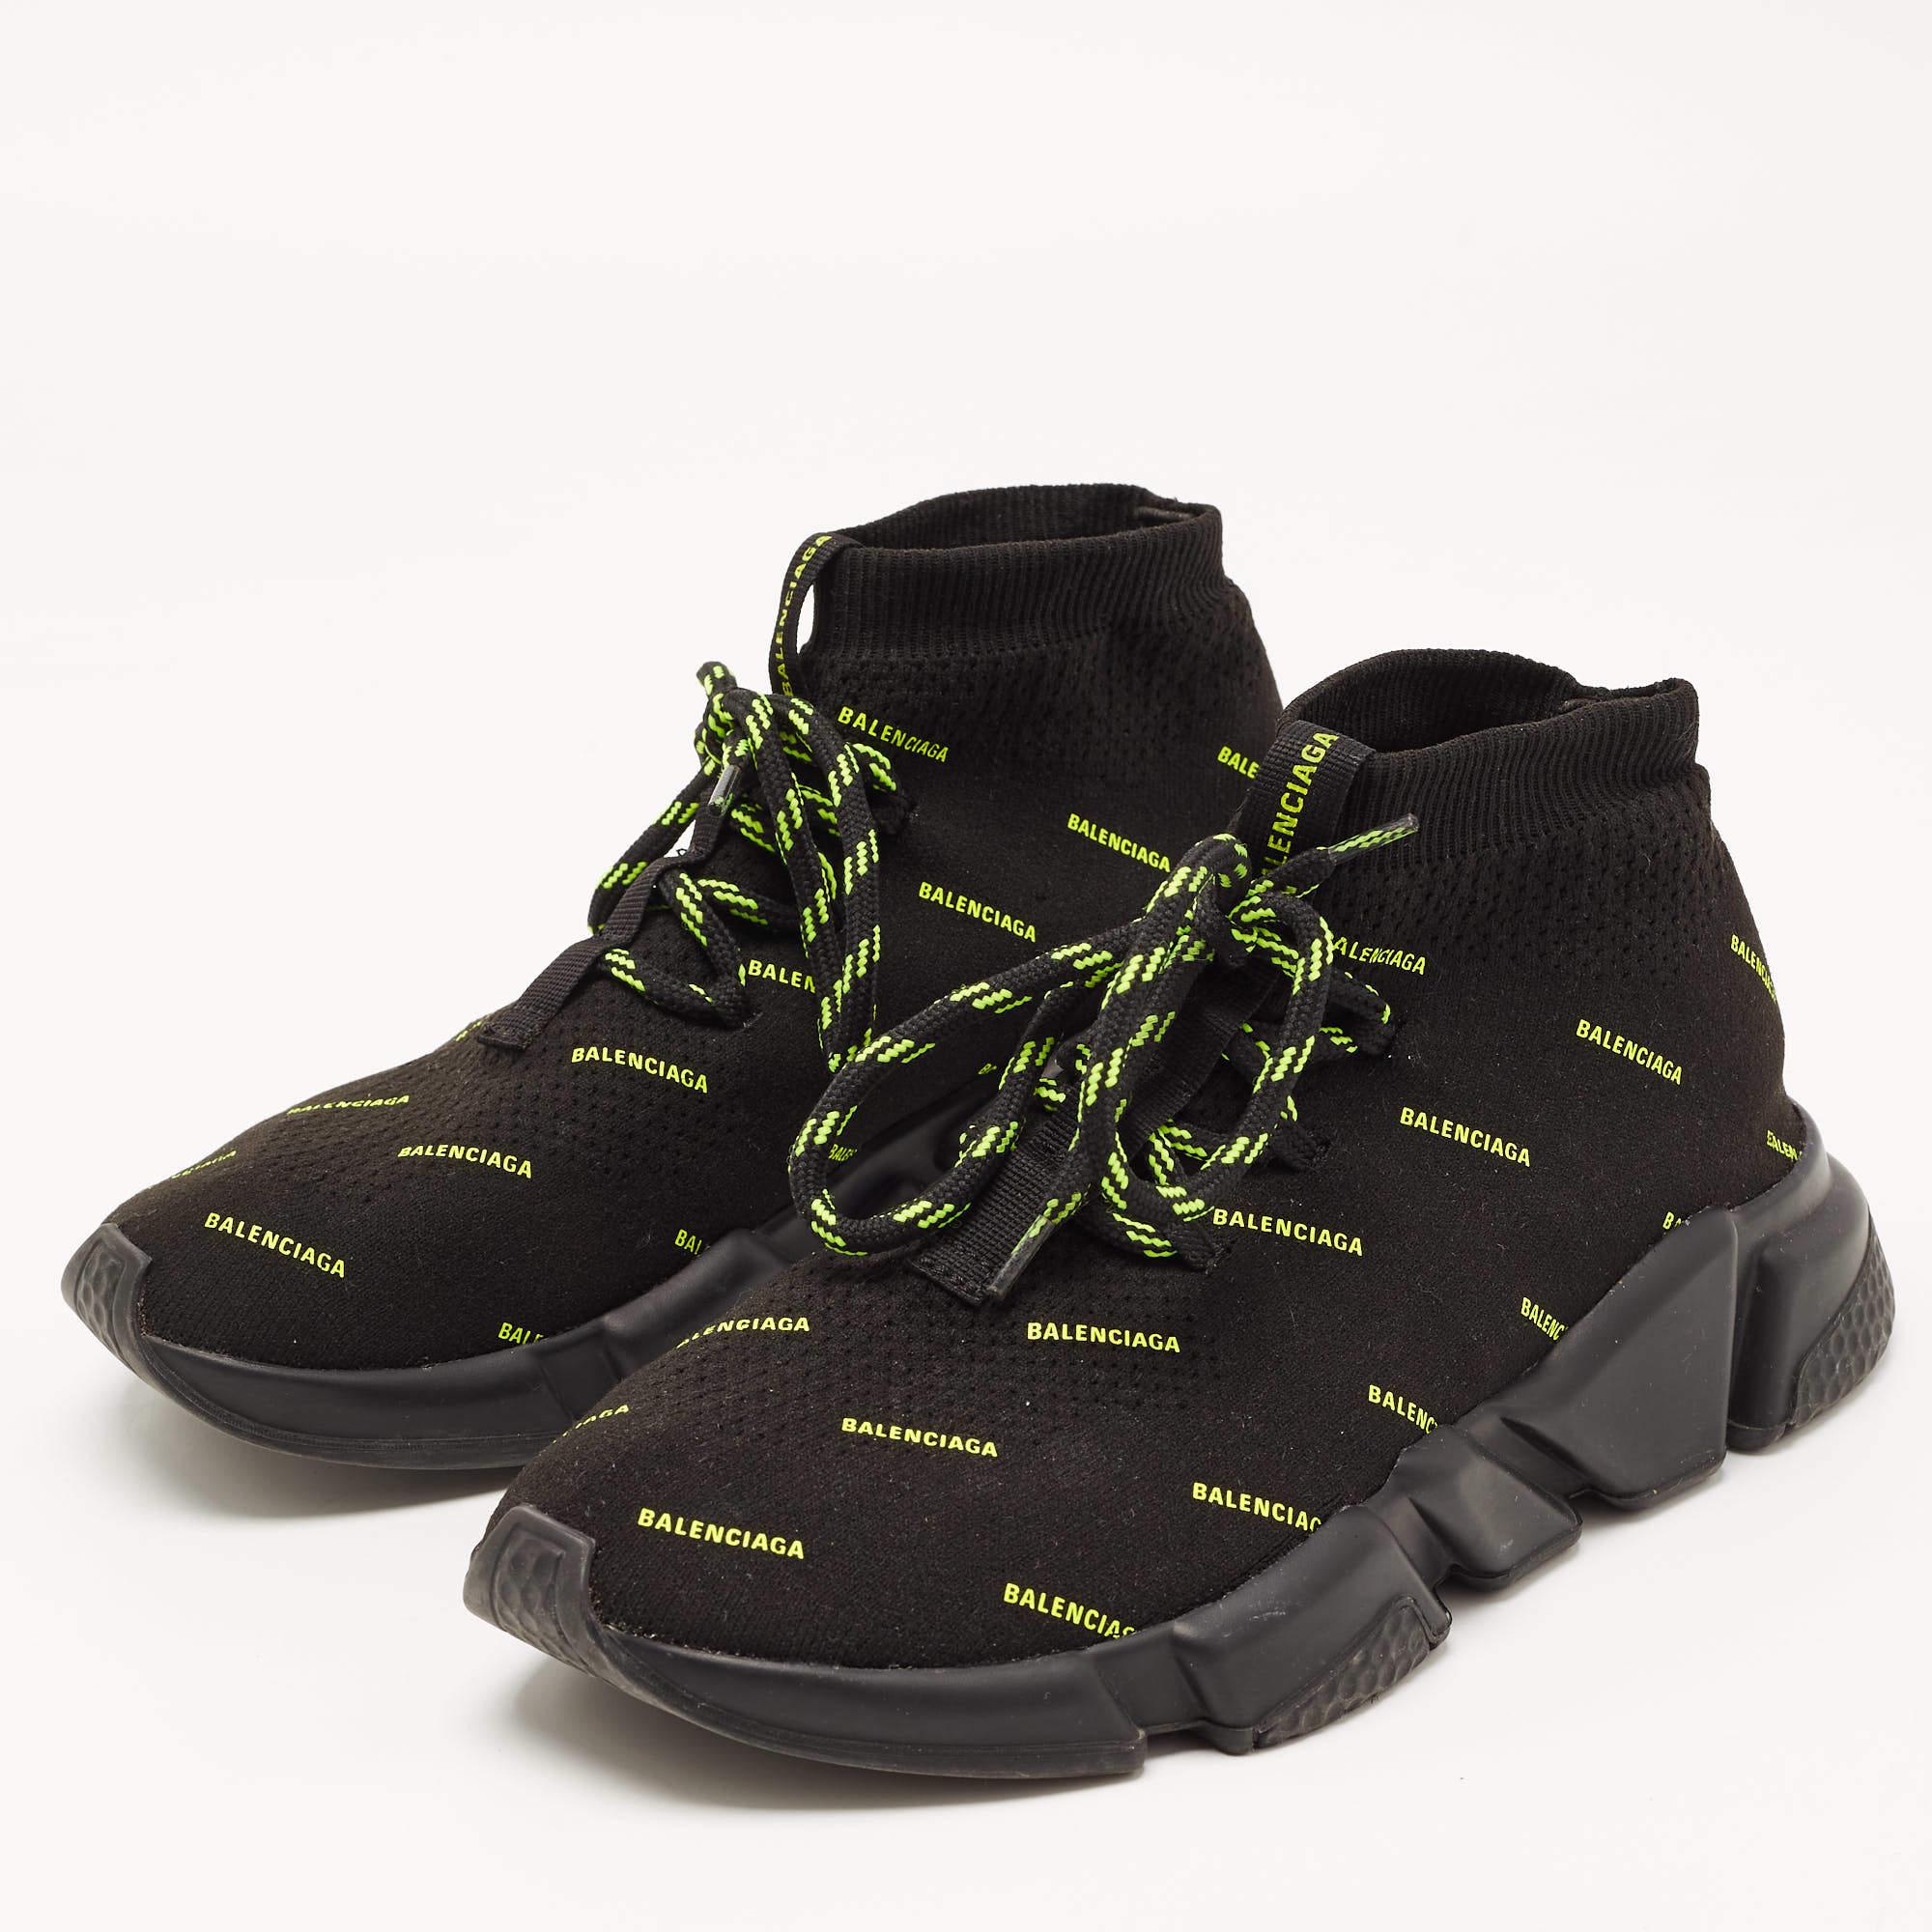 Let this comfortable pair be your first choice when you're out for a long day. These Balenciaga shoes have well-sewn uppers beautifully set on durable soles.

